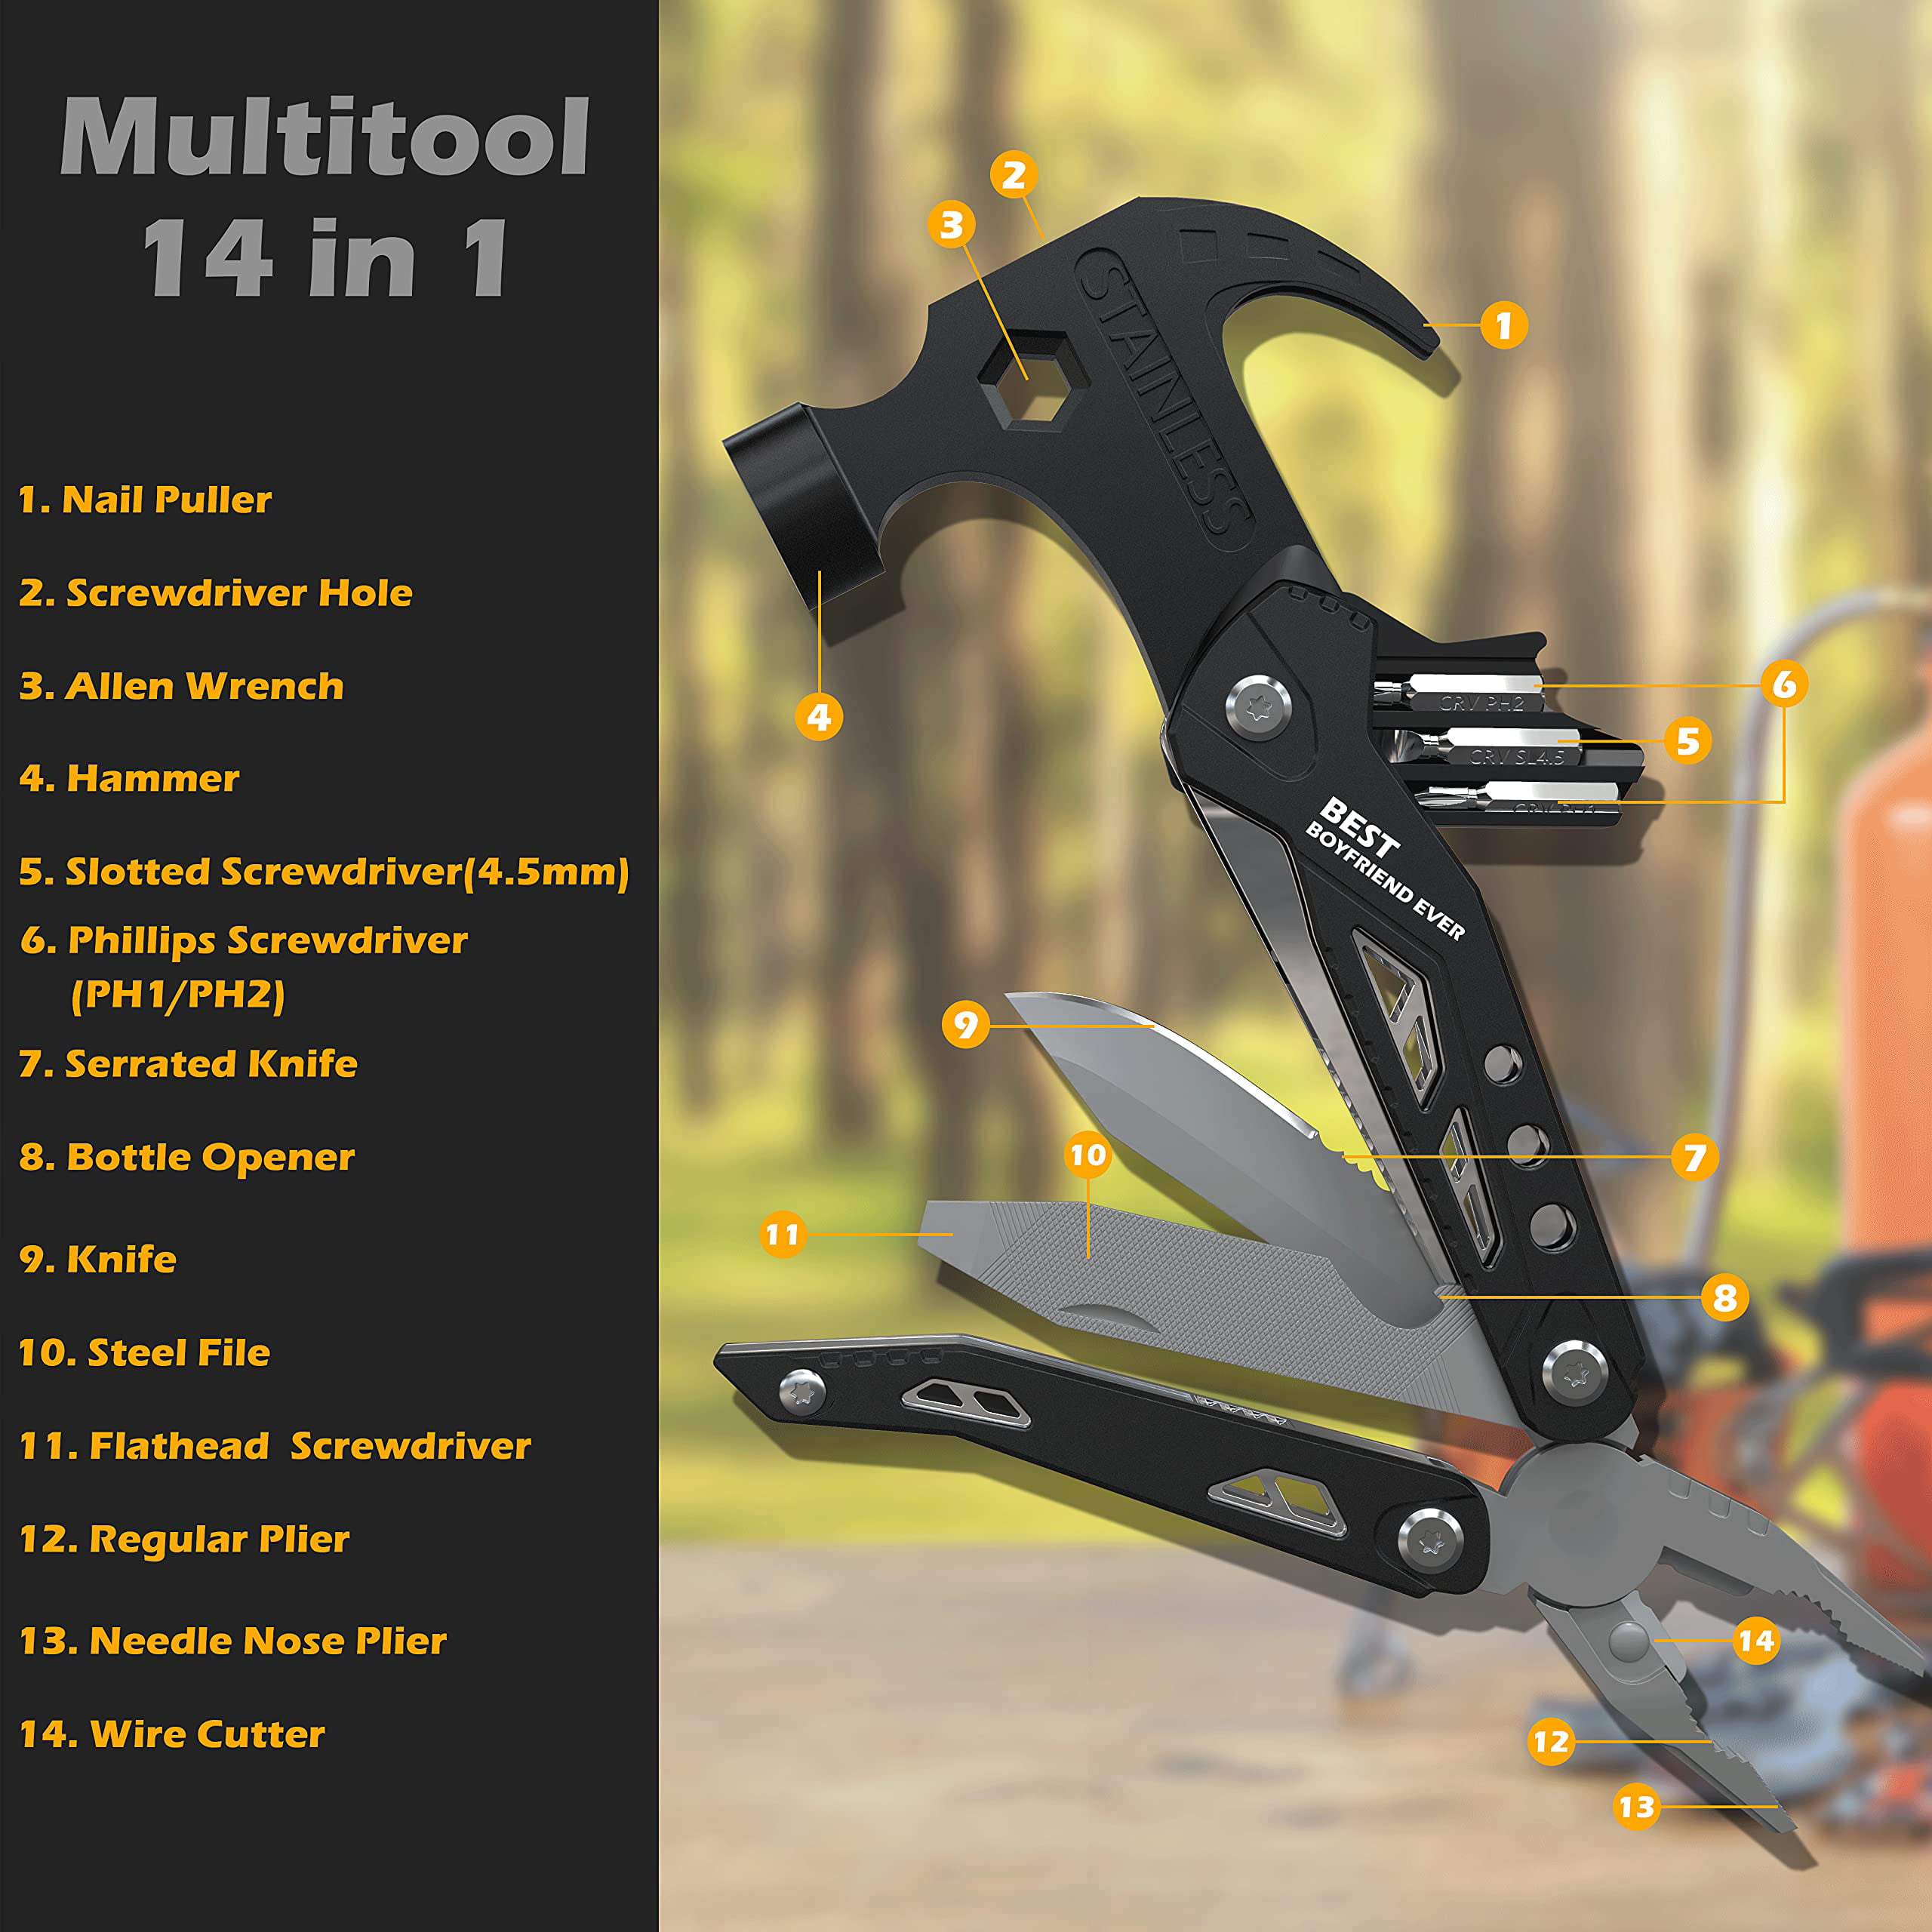 Men　Camping　Screwdrivers　Valentines　Him　Anniversary　Gifts　Day　Multitool　Birthday　14　Unique　for　Gifts　Boyfriend,　with　Accessories　Opener.　Gear.　Gifts　Survival　Bottle　in　RushDeer　Pliers　Hammer　for